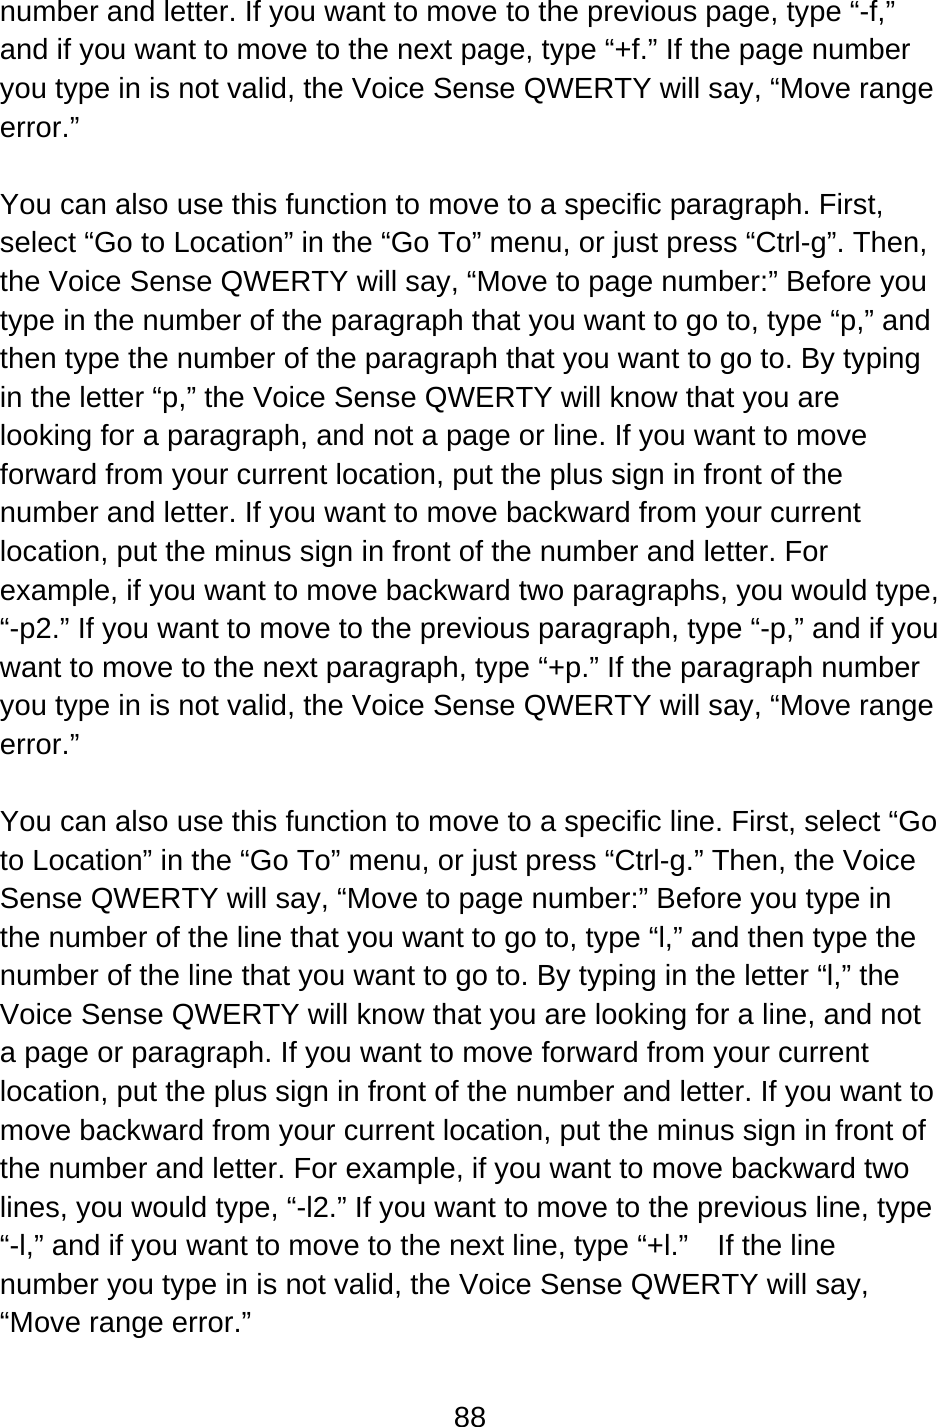 88  number and letter. If you want to move to the previous page, type “-f,” and if you want to move to the next page, type “+f.” If the page number you type in is not valid, the Voice Sense QWERTY will say, “Move range error.”  You can also use this function to move to a specific paragraph. First, select “Go to Location” in the “Go To” menu, or just press “Ctrl-g”. Then, the Voice Sense QWERTY will say, “Move to page number:” Before you type in the number of the paragraph that you want to go to, type “p,” and then type the number of the paragraph that you want to go to. By typing in the letter “p,” the Voice Sense QWERTY will know that you are looking for a paragraph, and not a page or line. If you want to move forward from your current location, put the plus sign in front of the number and letter. If you want to move backward from your current location, put the minus sign in front of the number and letter. For example, if you want to move backward two paragraphs, you would type, “-p2.” If you want to move to the previous paragraph, type “-p,” and if you want to move to the next paragraph, type “+p.” If the paragraph number you type in is not valid, the Voice Sense QWERTY will say, “Move range error.”  You can also use this function to move to a specific line. First, select “Go to Location” in the “Go To” menu, or just press “Ctrl-g.” Then, the Voice Sense QWERTY will say, “Move to page number:” Before you type in the number of the line that you want to go to, type “l,” and then type the number of the line that you want to go to. By typing in the letter “l,” the Voice Sense QWERTY will know that you are looking for a line, and not a page or paragraph. If you want to move forward from your current location, put the plus sign in front of the number and letter. If you want to move backward from your current location, put the minus sign in front of the number and letter. For example, if you want to move backward two lines, you would type, “-l2.” If you want to move to the previous line, type “-l,” and if you want to move to the next line, type “+l.”    If the line number you type in is not valid, the Voice Sense QWERTY will say, “Move range error.”  